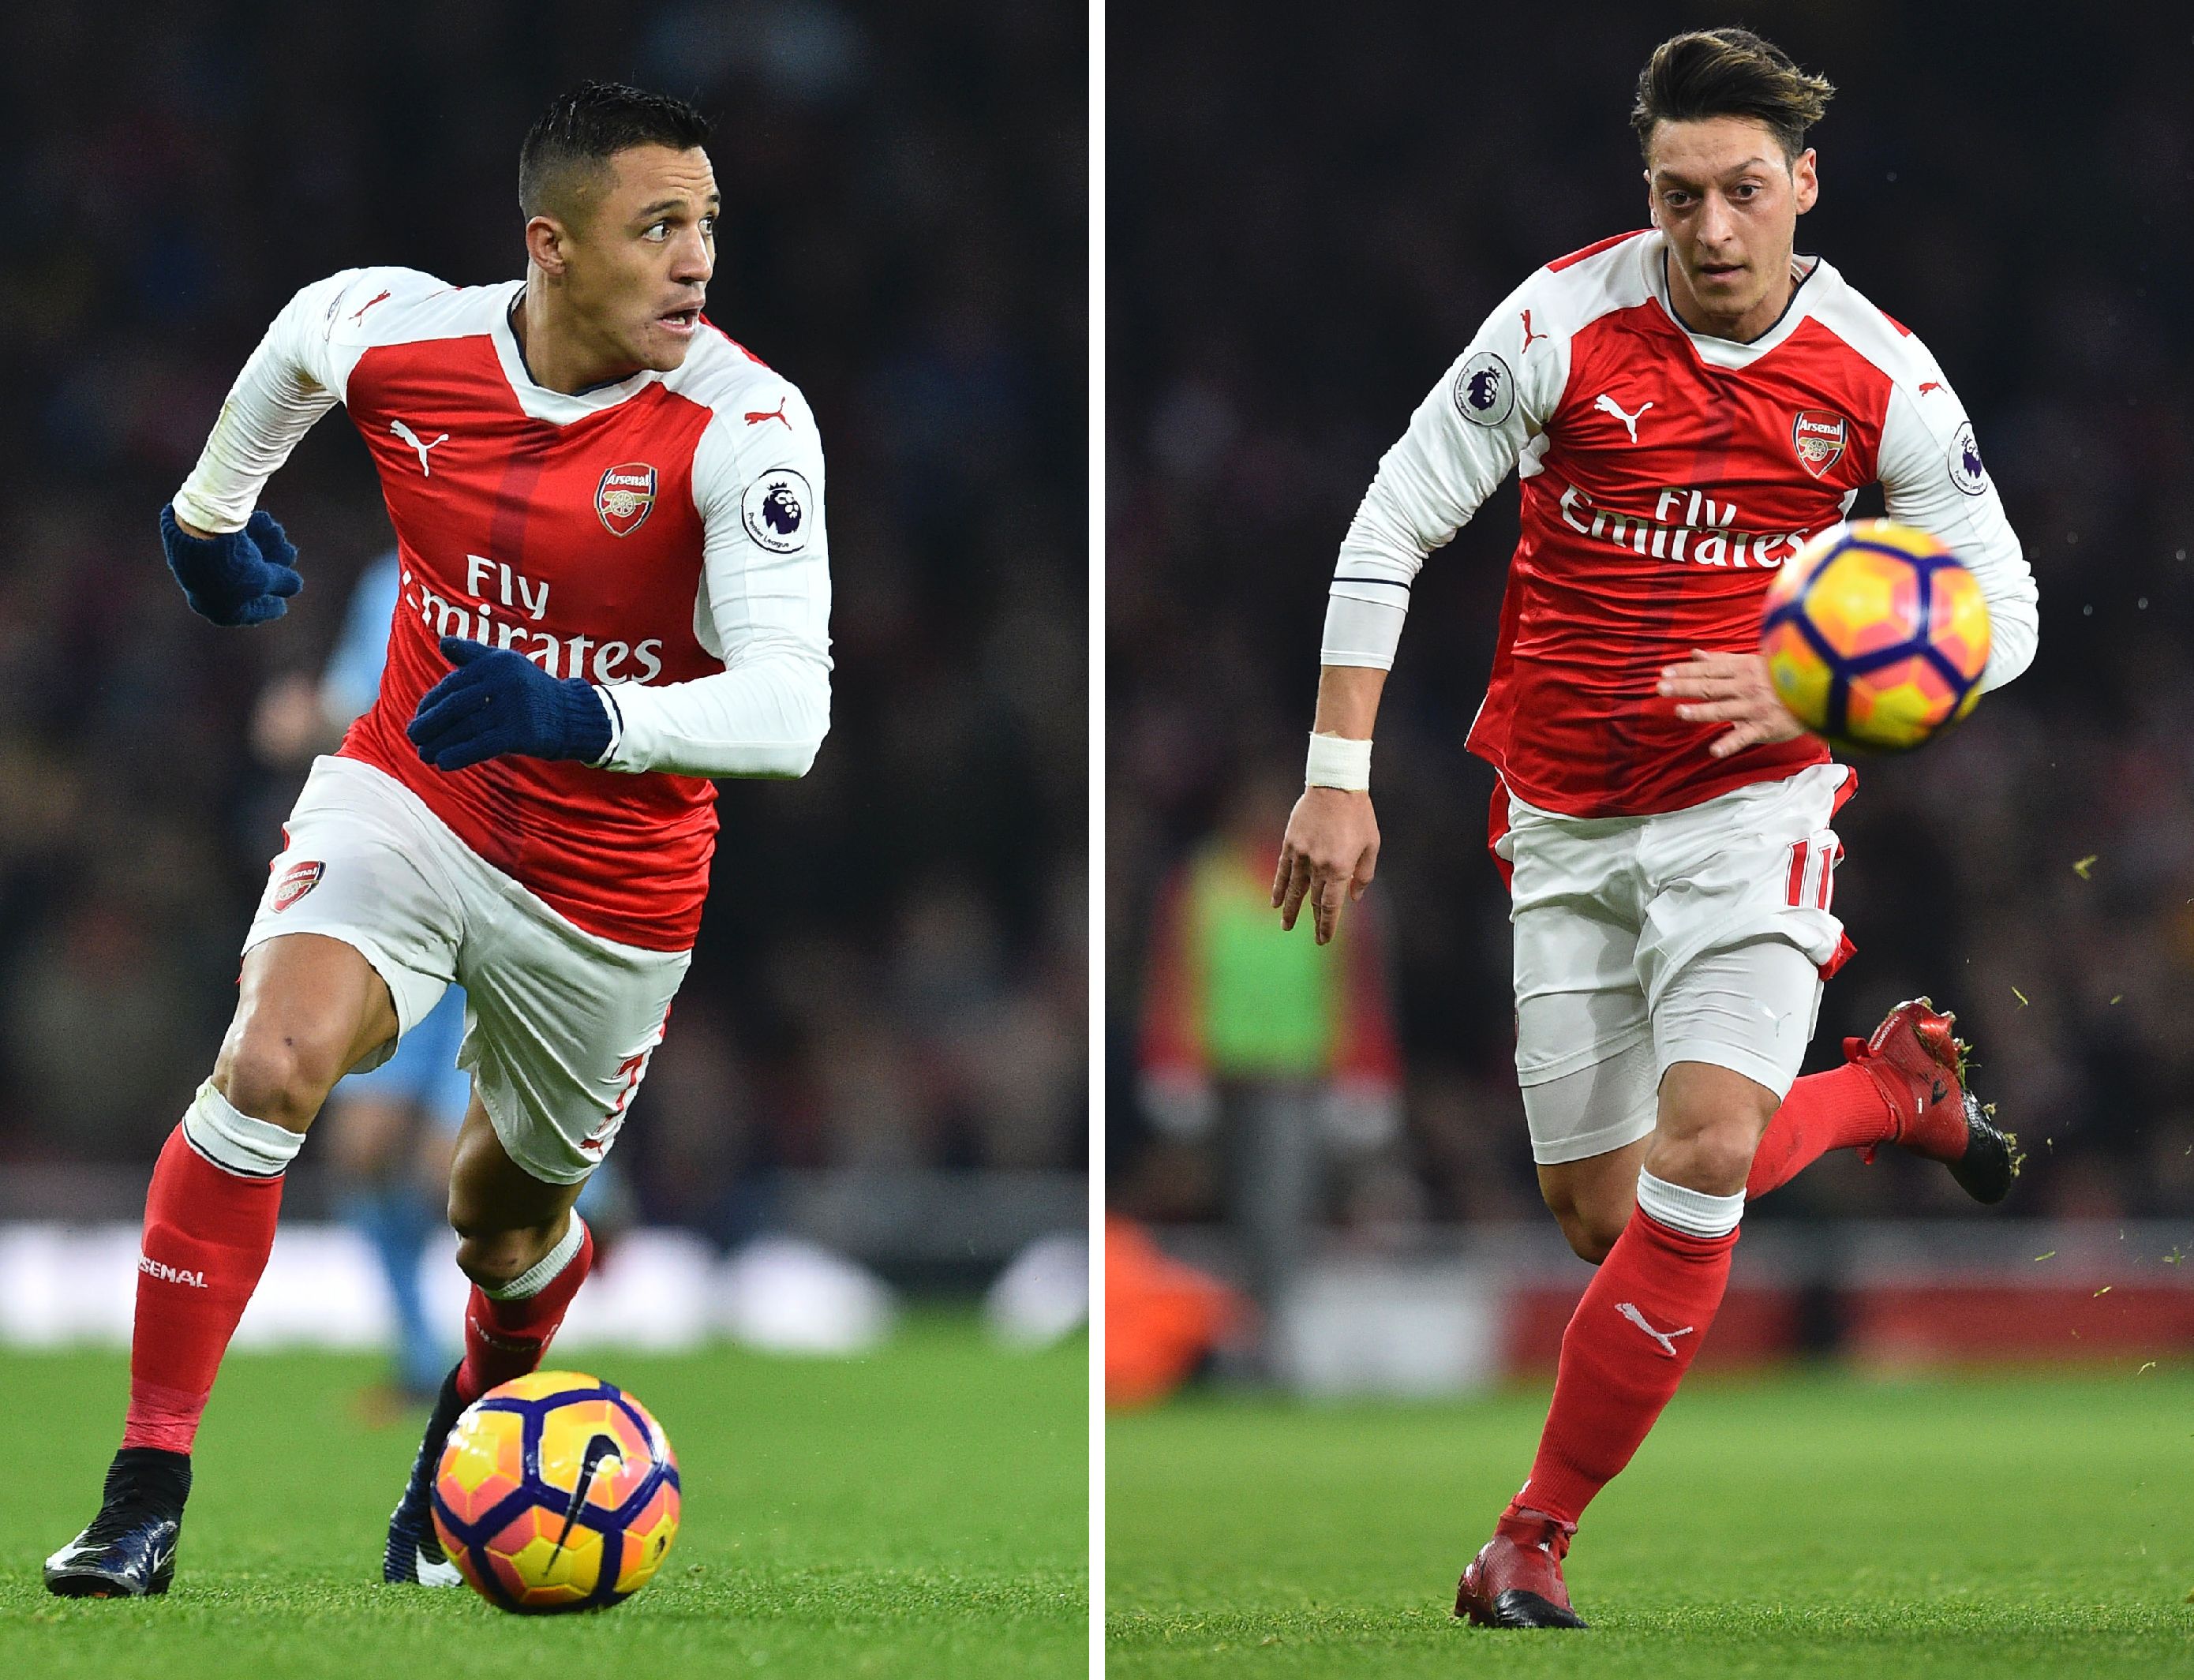 A combination of pictures created in London on January 29, 2017 shows Arsenal's Chilean striker Alexis Sanchez (L) running with the ball during the English Premier League football match between Arsenal and Stoke City at the Emirates Stadium in London on December 10, 2016 and Arsenal's German midfielder Mesut Ozil (R) running for the ball during the same match. 
The Premier League's star imports are demanding huge pay rises as clubs' TV revenues rocket, Chinese teams entice them with mega wages -- and the pound slumps ahead of Brexit. Some players have secured bumper increases but Arsenal have yet to meet the demands of Mesut Ozil and Alexis Sanchez. Reports suggest World Cup winner Ozil and Sanchez, twice winner of the Copa America, each want around £250,000 per week as they also factor in the cost of converting pounds into their native currencies.
 / AFP / Glyn KIRK / RESTRICTED TO EDITORIAL USE. No use with unauthorized audio, video, data, fixture lists, club/league logos or 'live' services. Online in-match use limited to 75 images, no video emulation. No use in betting, games or single club/league/player publications.  / TO GO WITH AFP STORY BY BEN PERRY AND PIRATE IRWIN        (Photo credit should read GLYN KIRK/AFP/Getty Images)